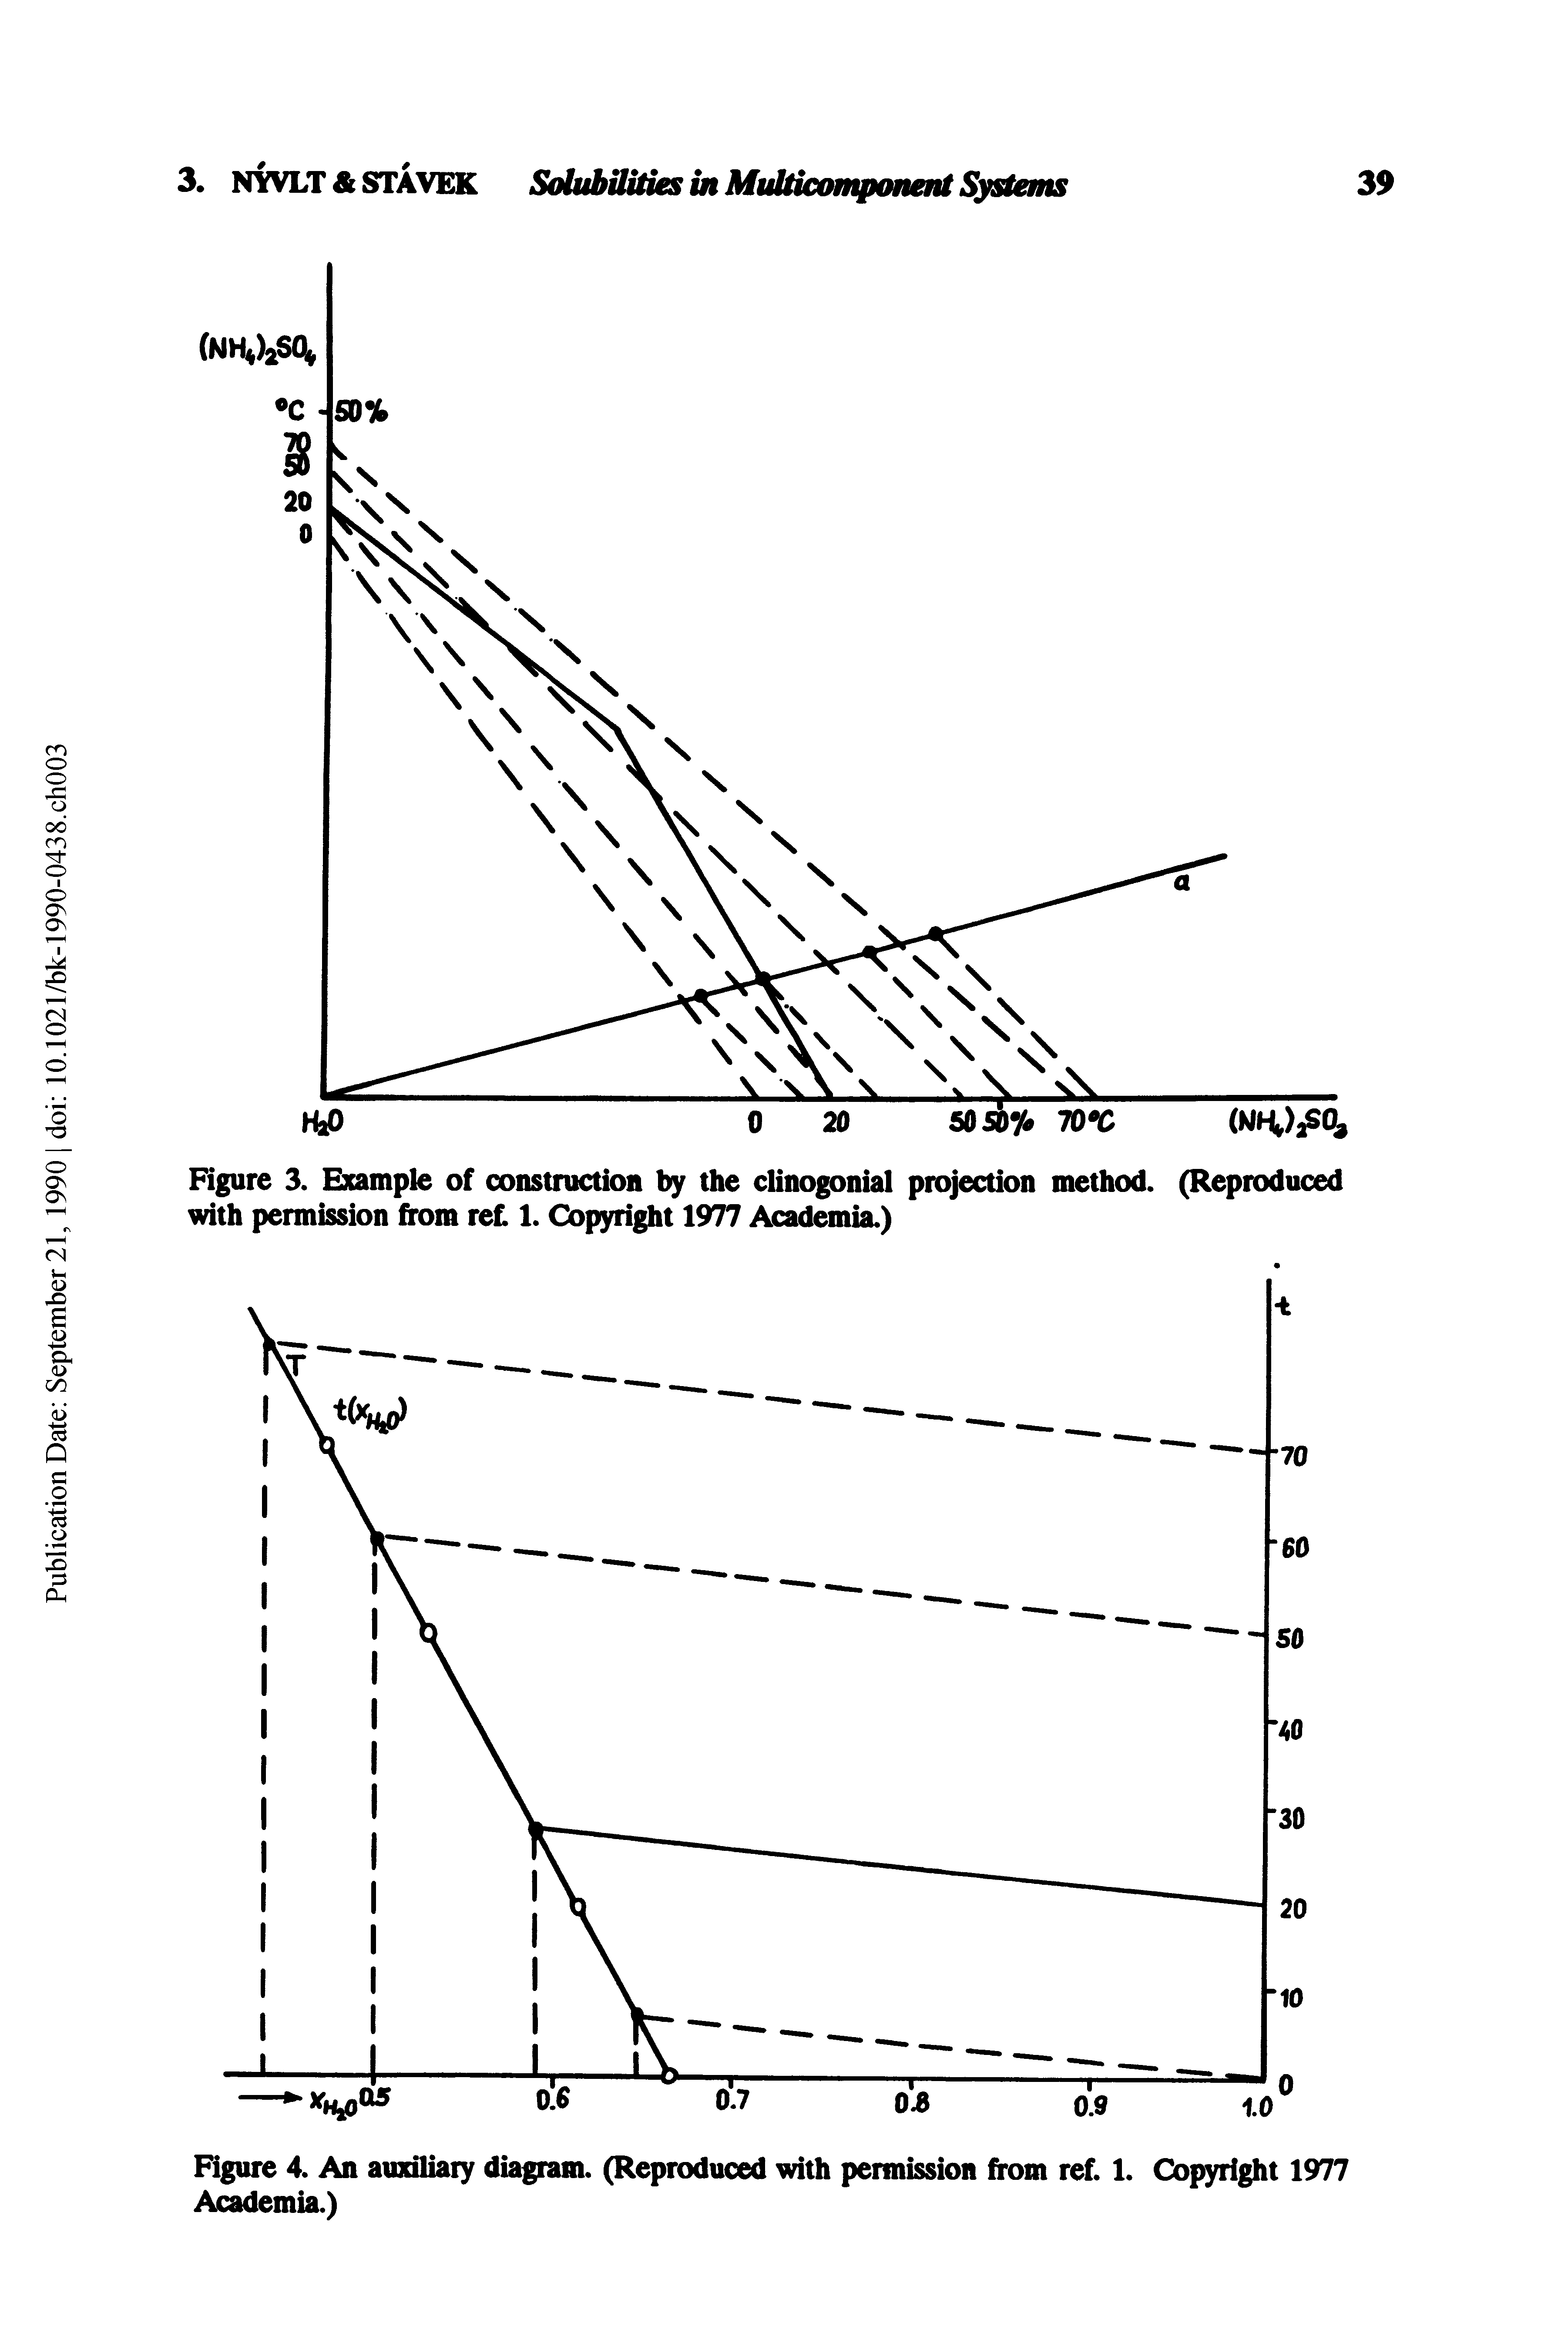 Figure 4. An auxiliary diagram. (Reproduced with permission from ref. 1. Copyright 1977 Academia.)...